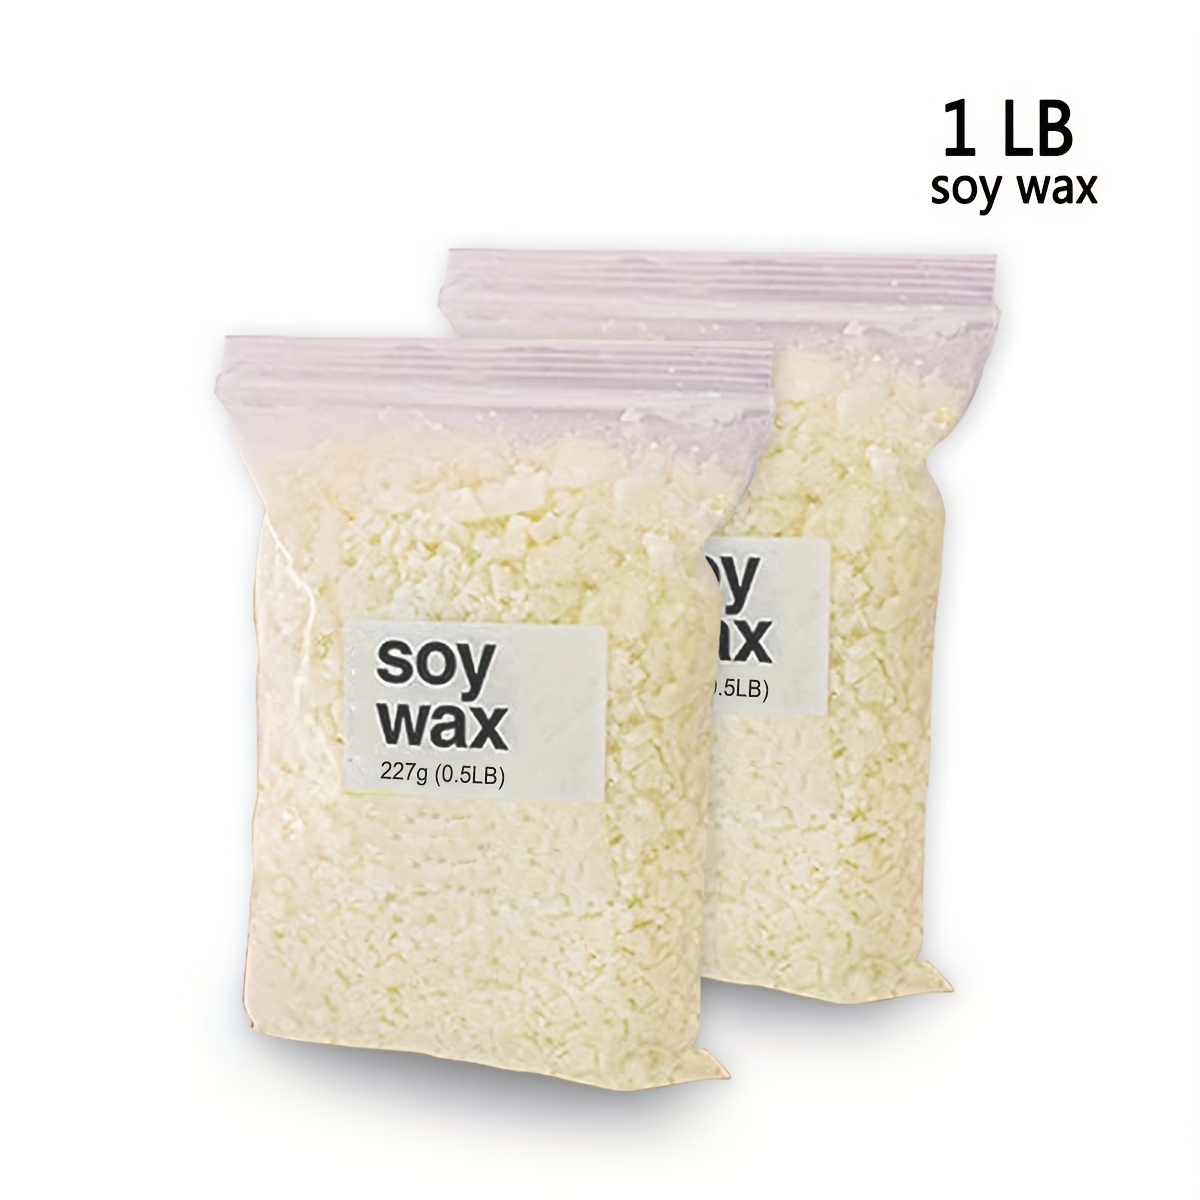 2.2lb Soy Wax Flakes For Candle Making